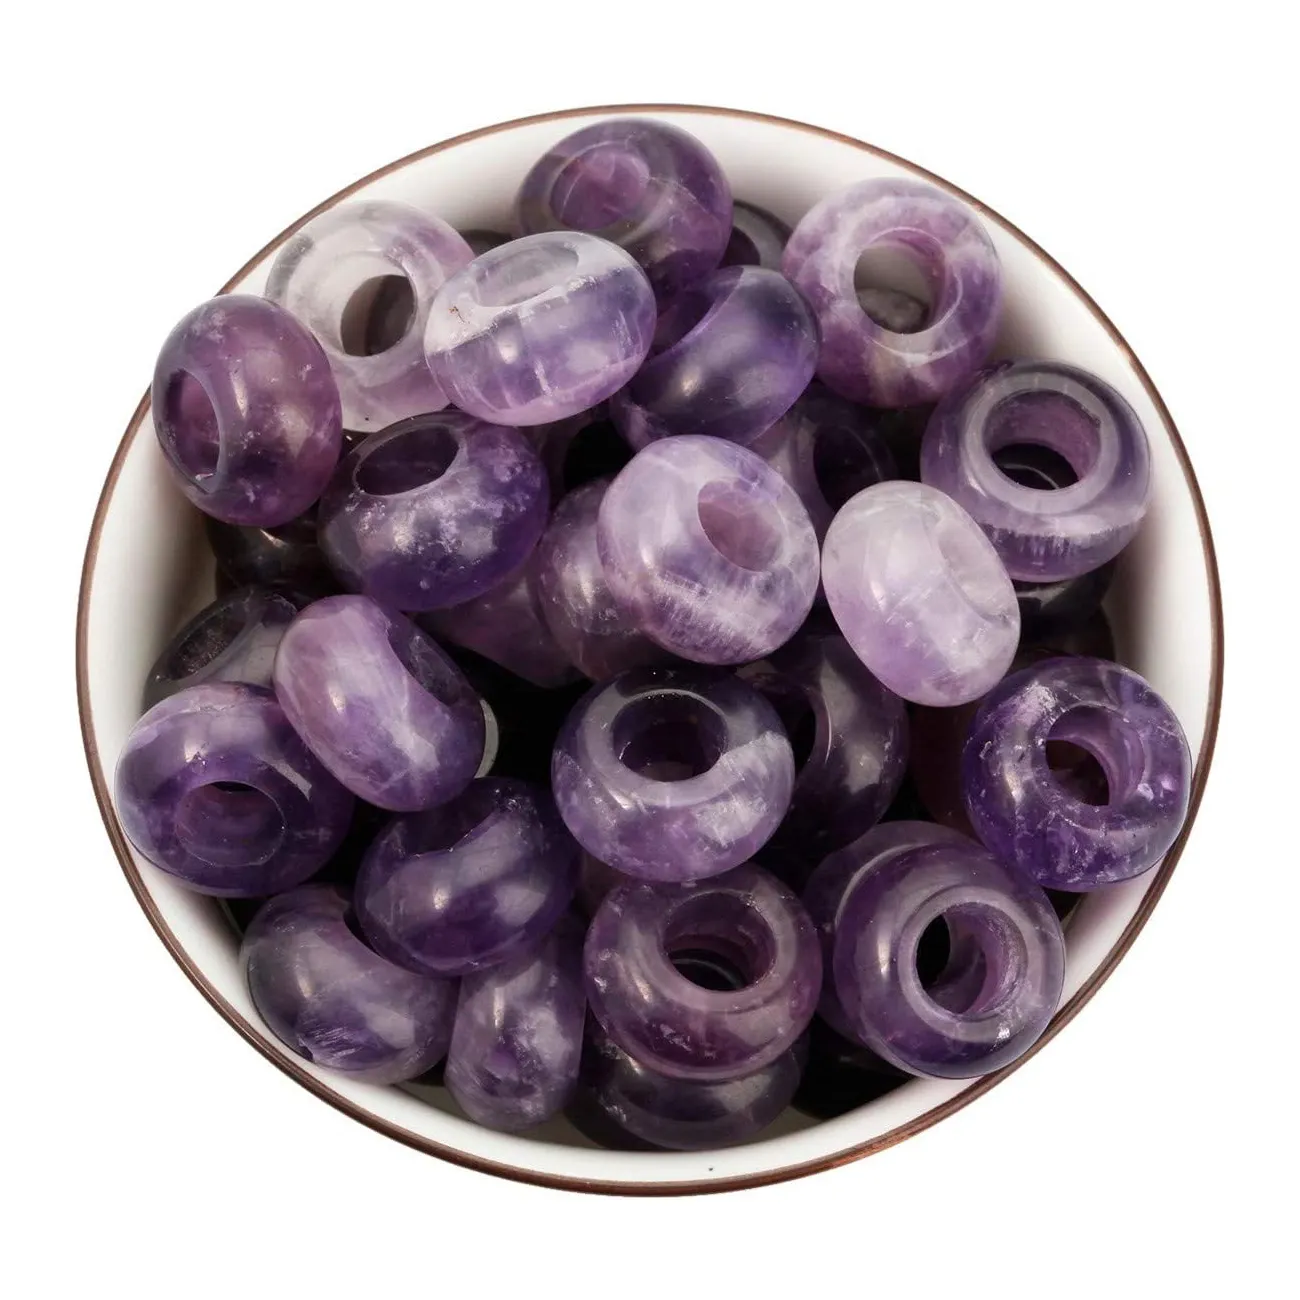 Natural Amethyst Rose Quartz Rondelle Stone with Large Hole (5mm) Loose Semi Gemstone Beads for Jewelry Making 8x14 mm